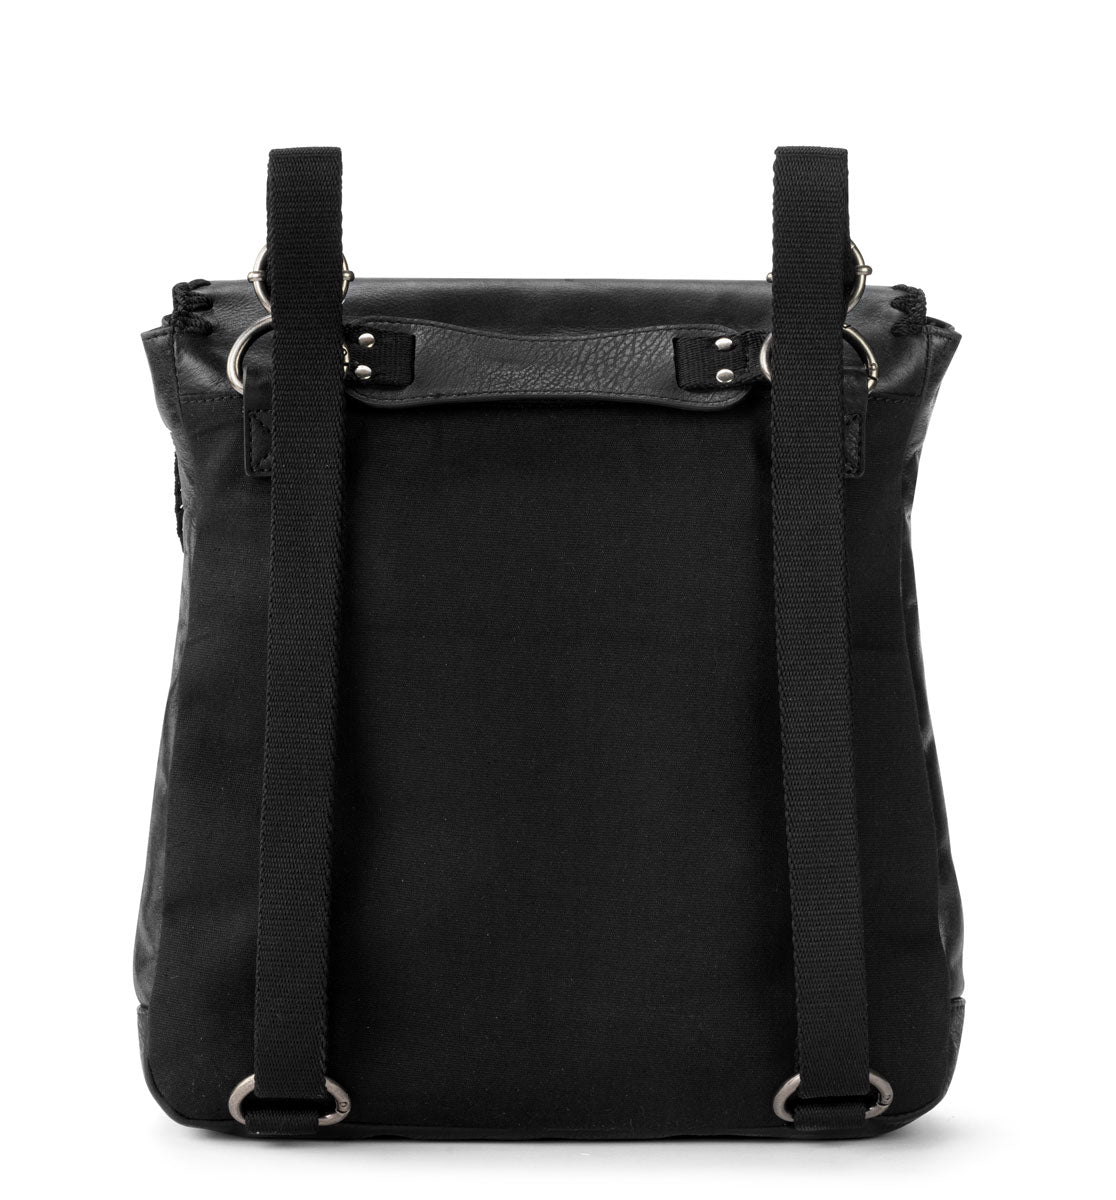 Women's Leather Backpack, 13 Laptop Bag Convertible Tote